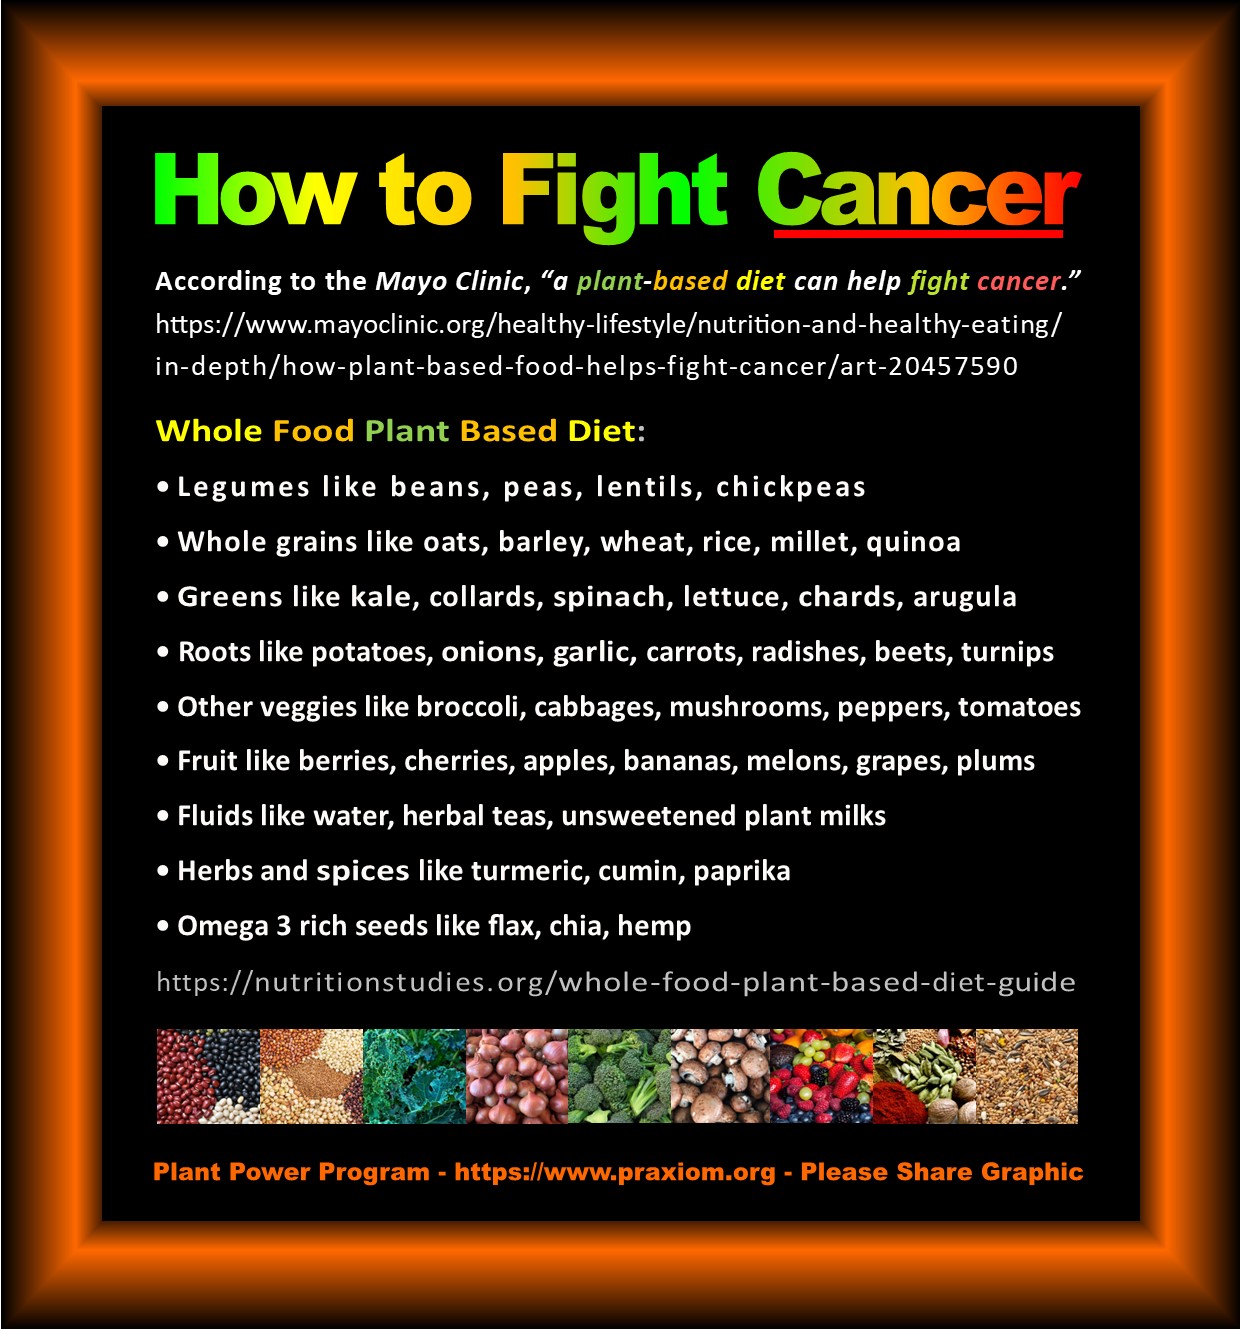 How to Fight Cancer